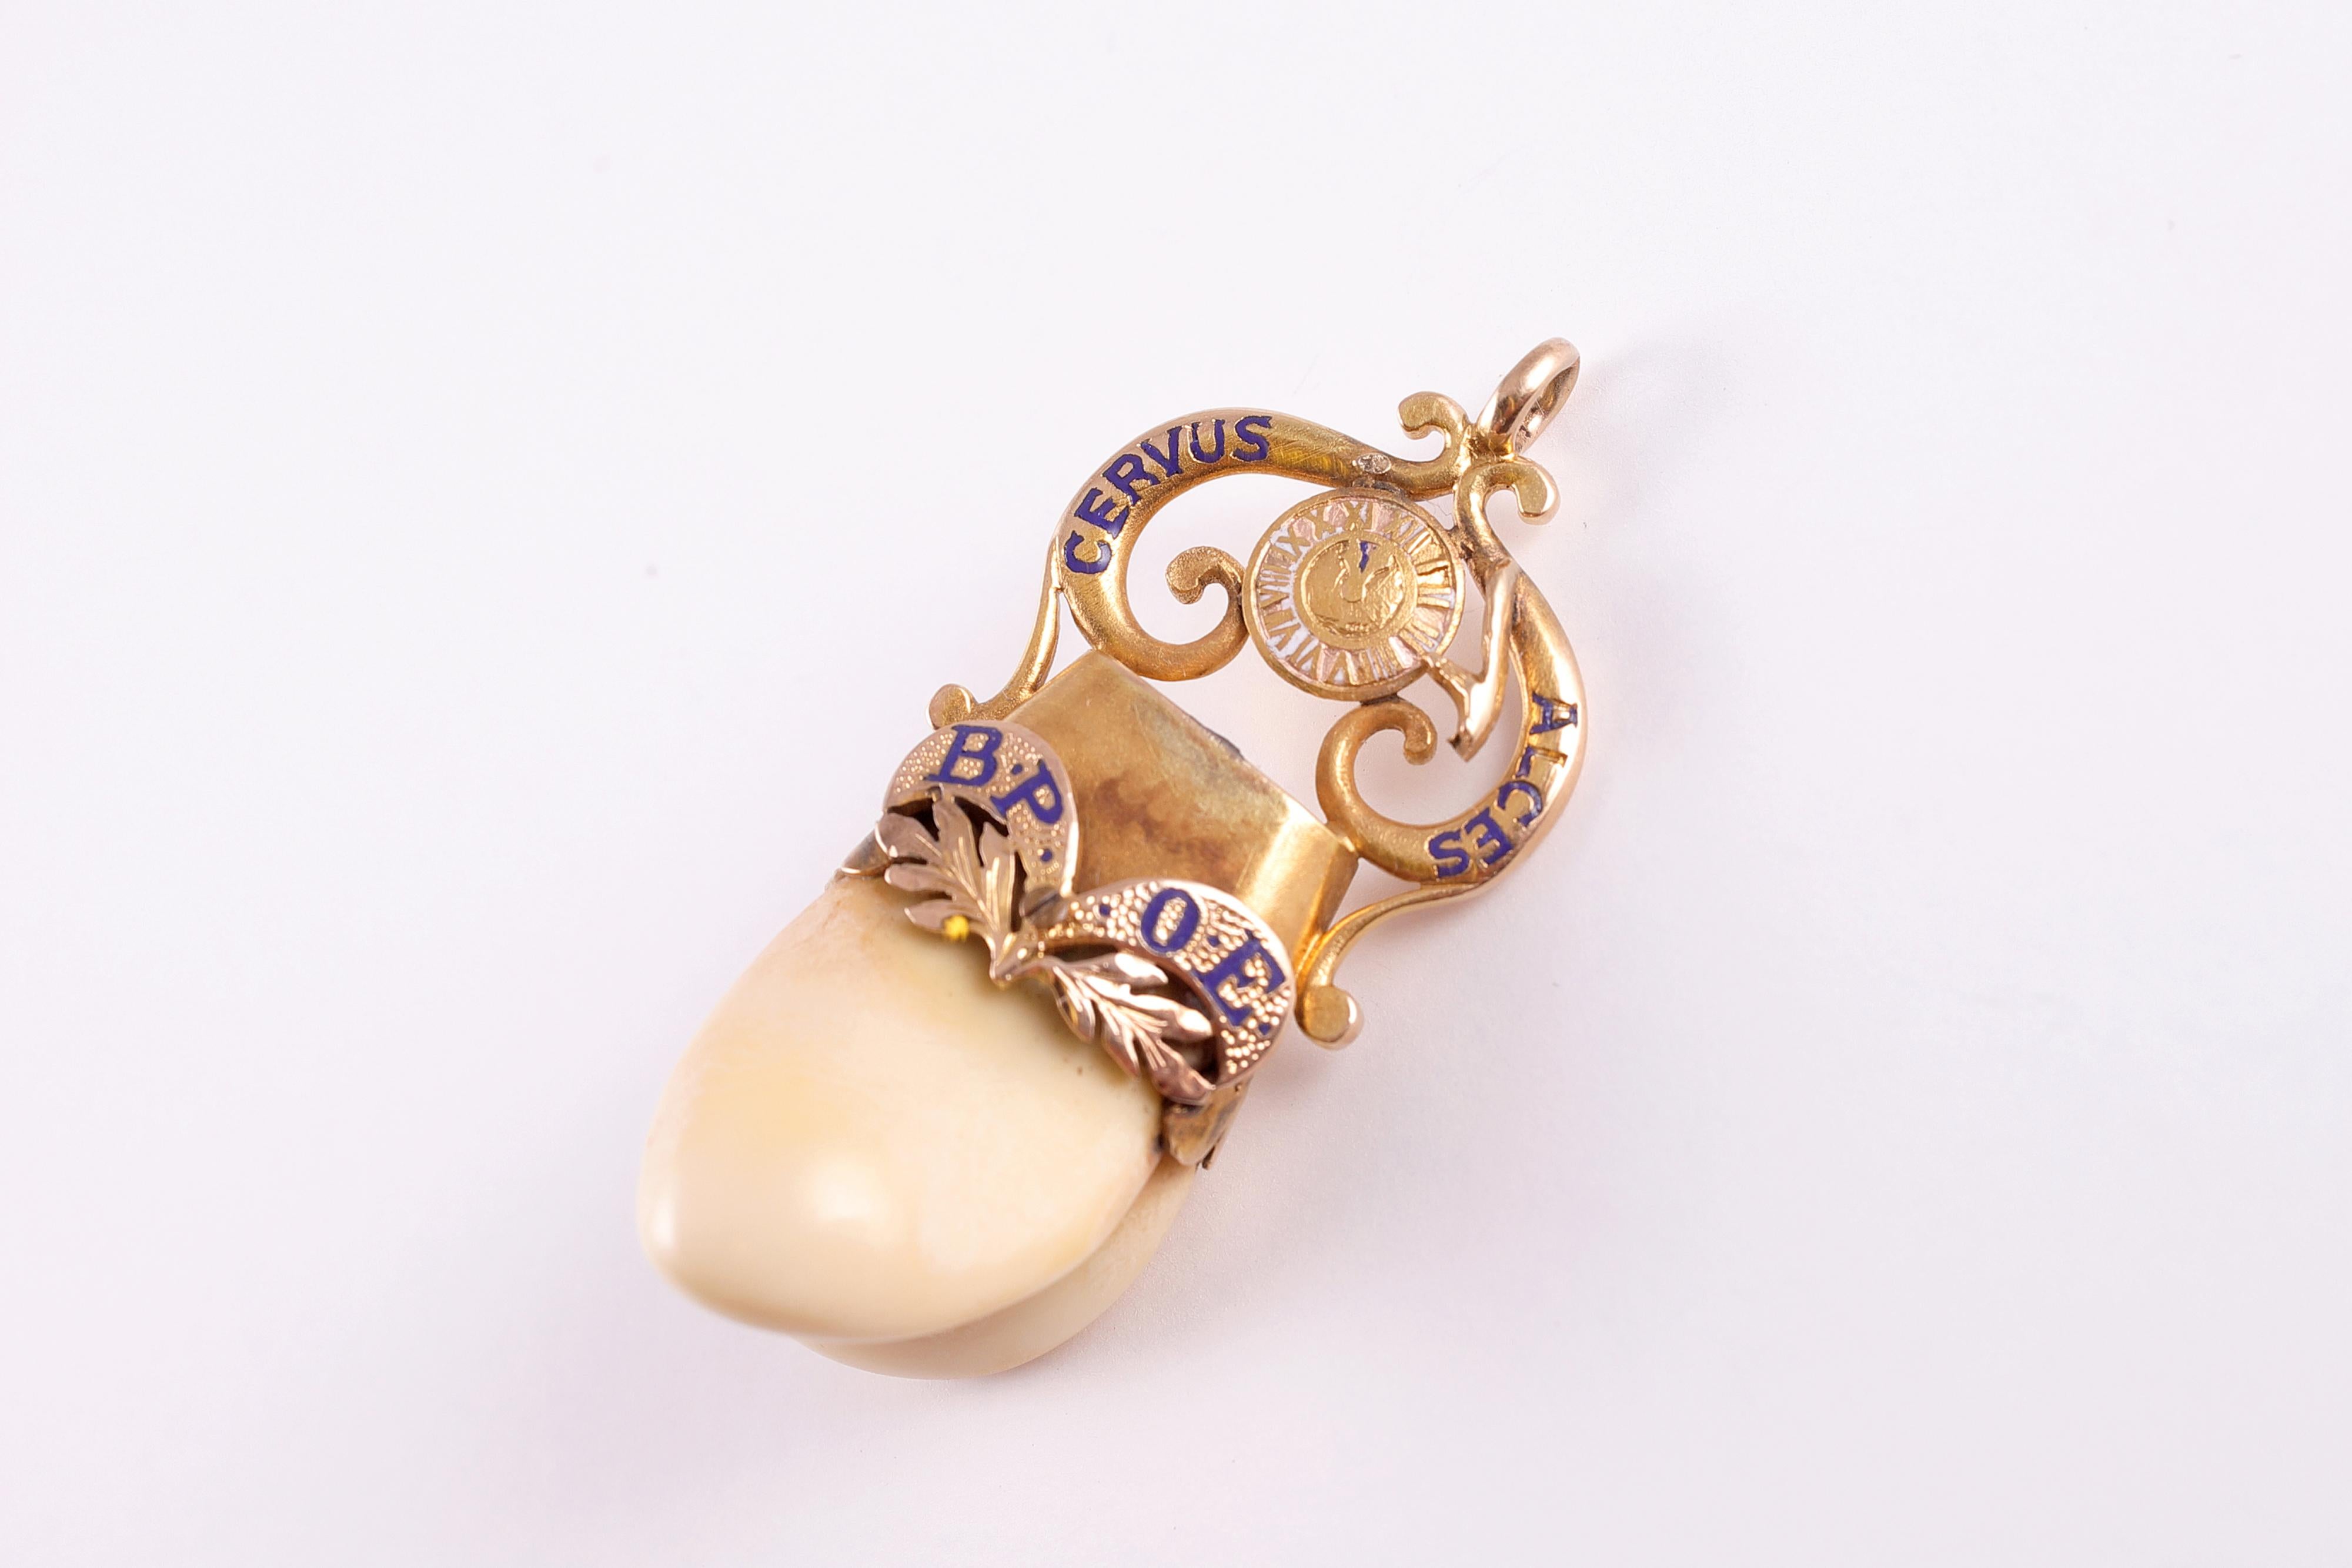 Elk's Lodge double tooth fob with 14 karat yellow gold.  Enamel accents stating 